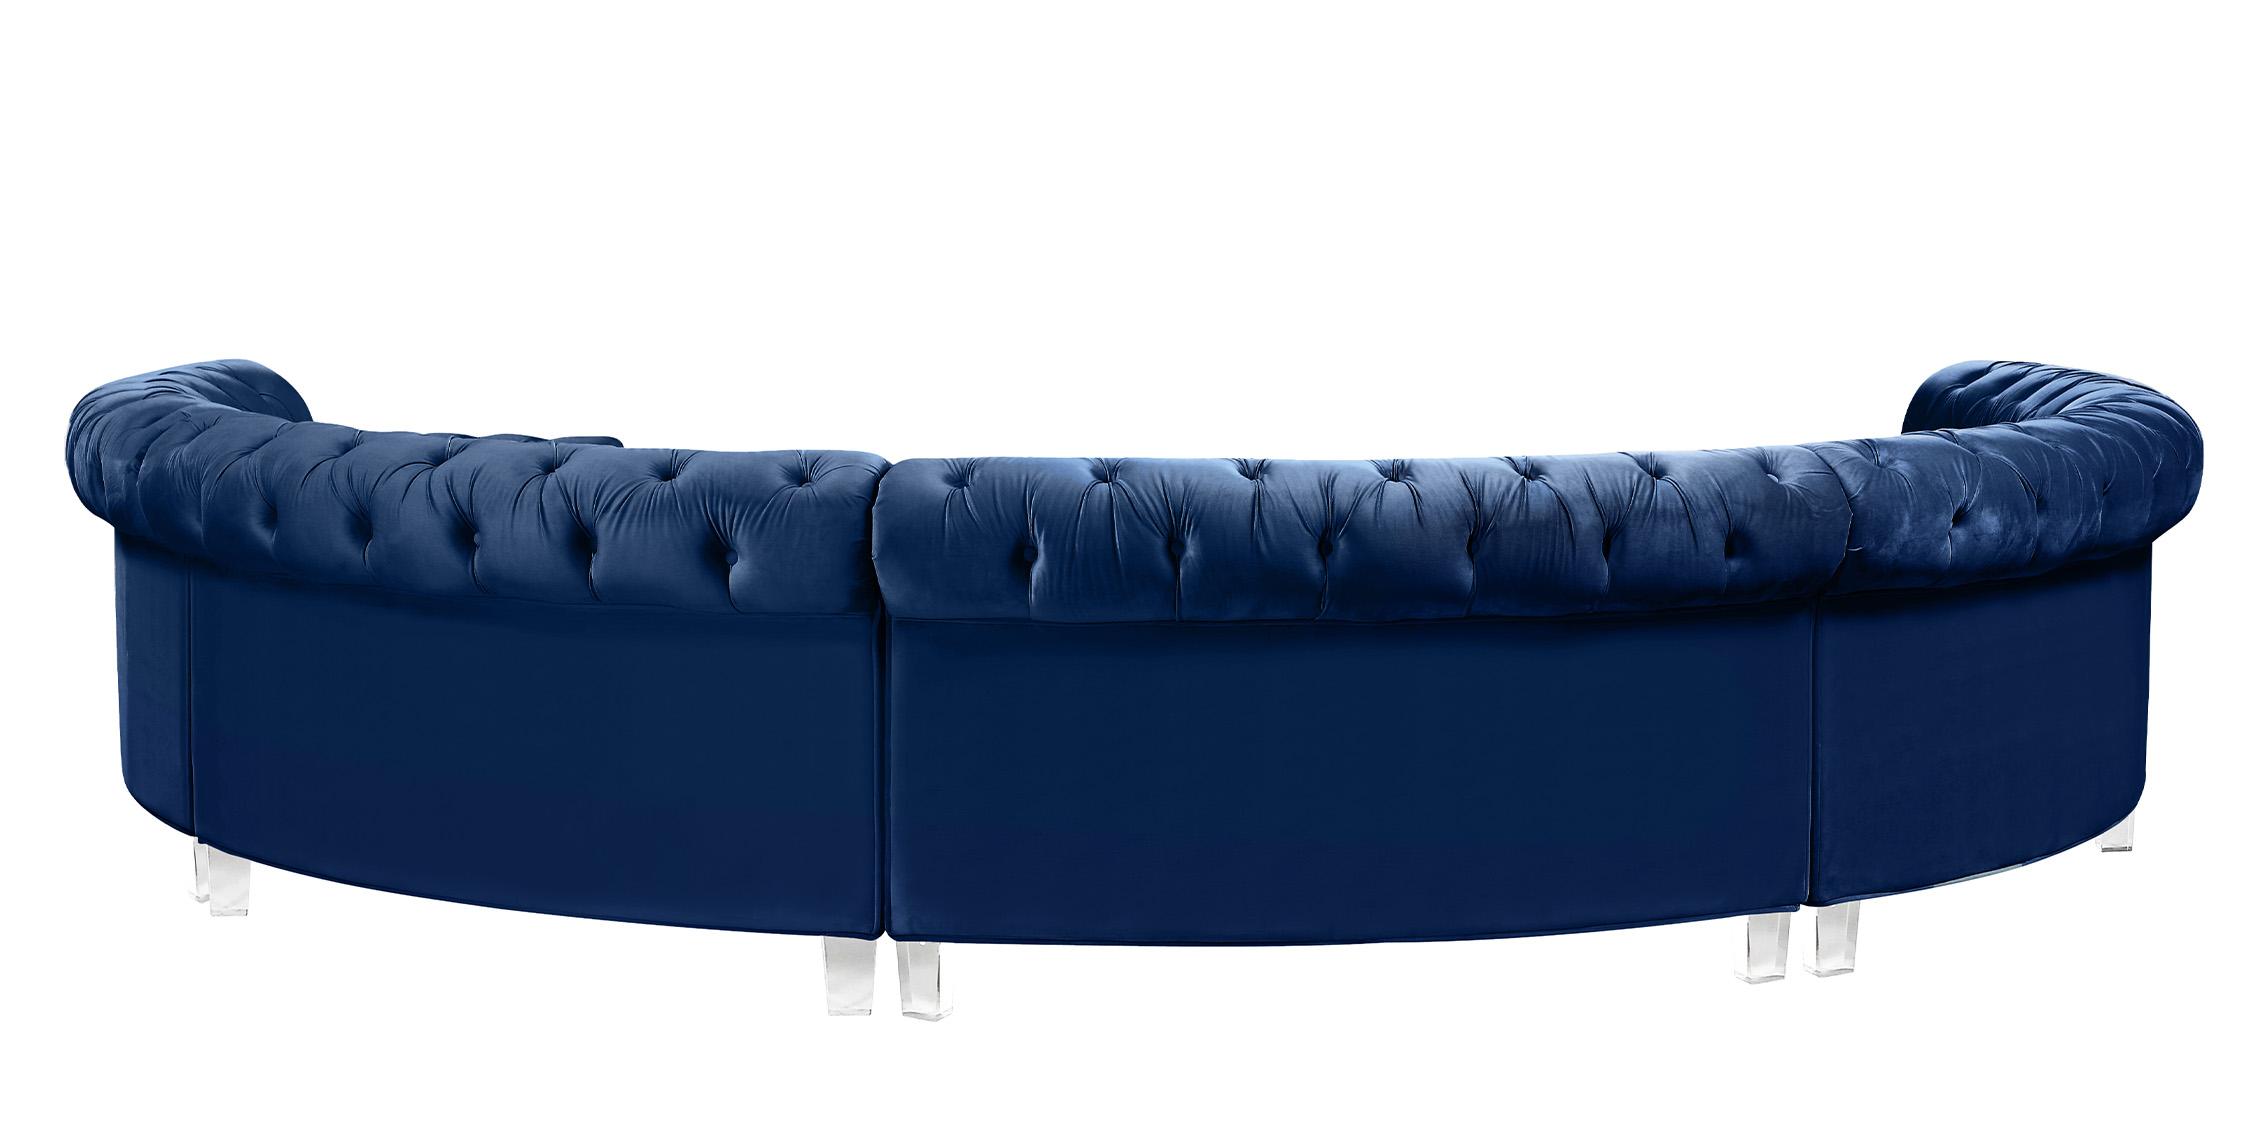 

    
Meridian Furniture ANABELLA-697Navy-5 Sectional Sofa Navy blue 697Navy-Sec-5PC
